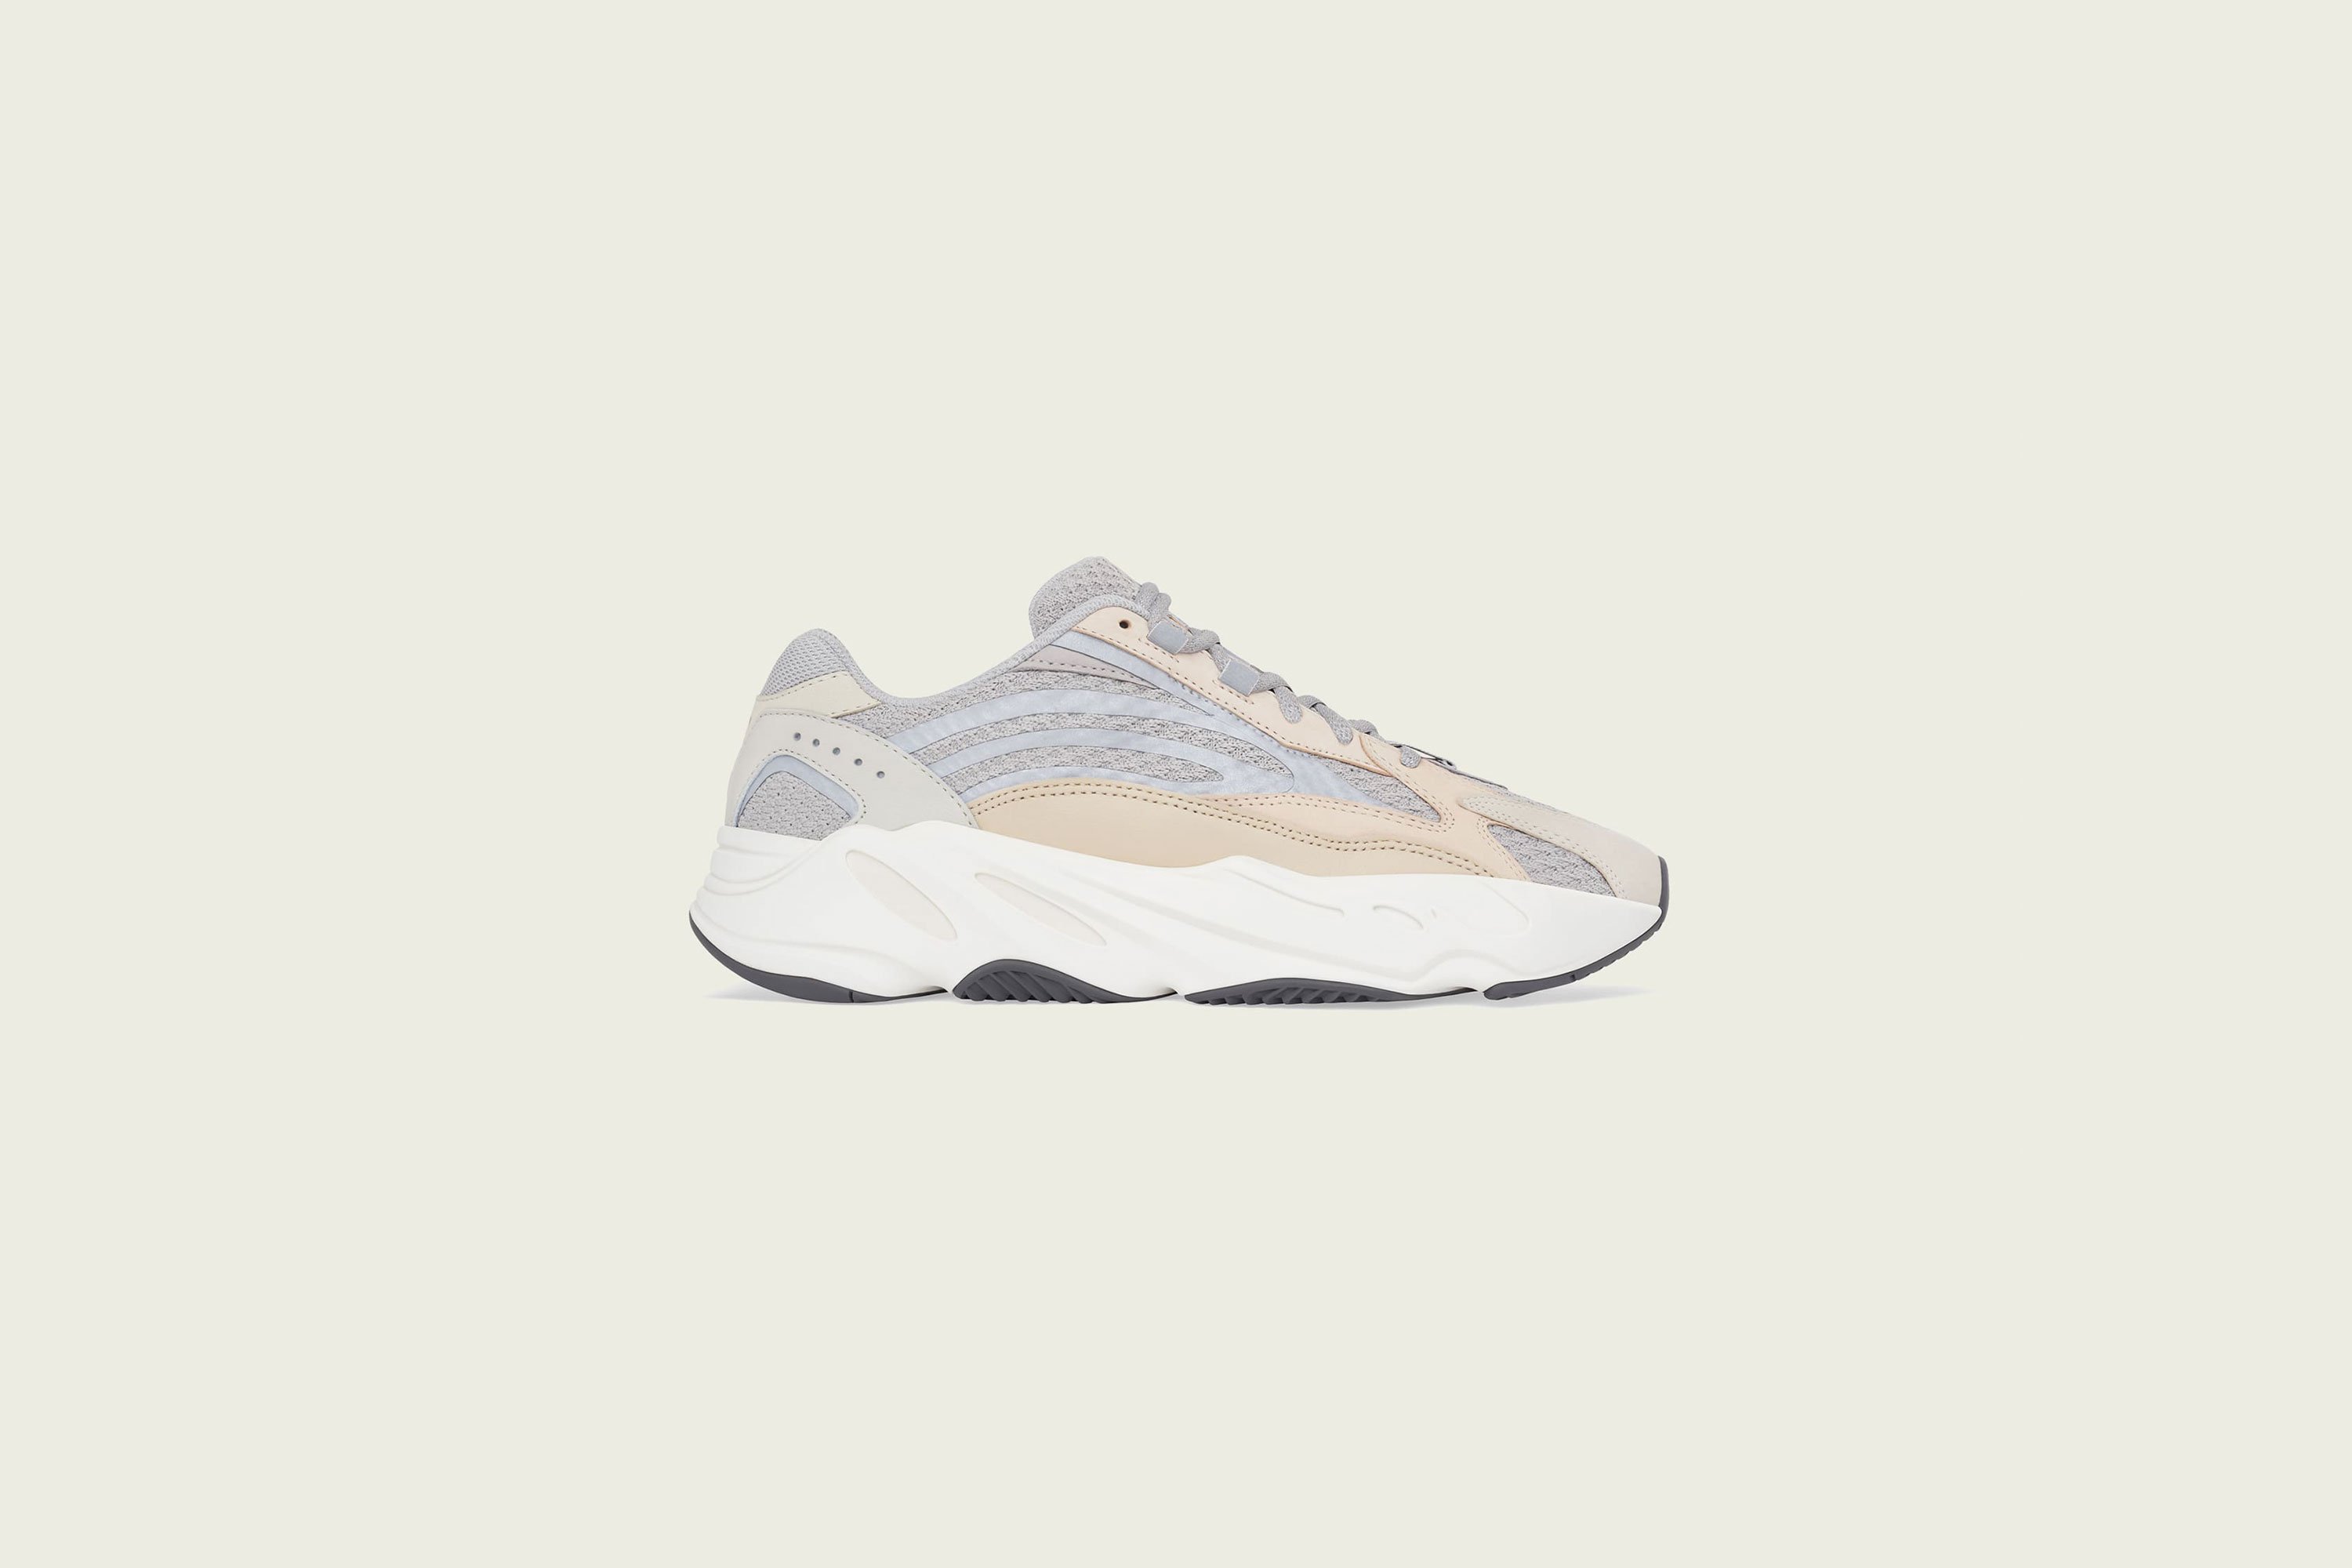 Up There Launches - adidas Originals Yeezy Boost 700v2 'Cream'